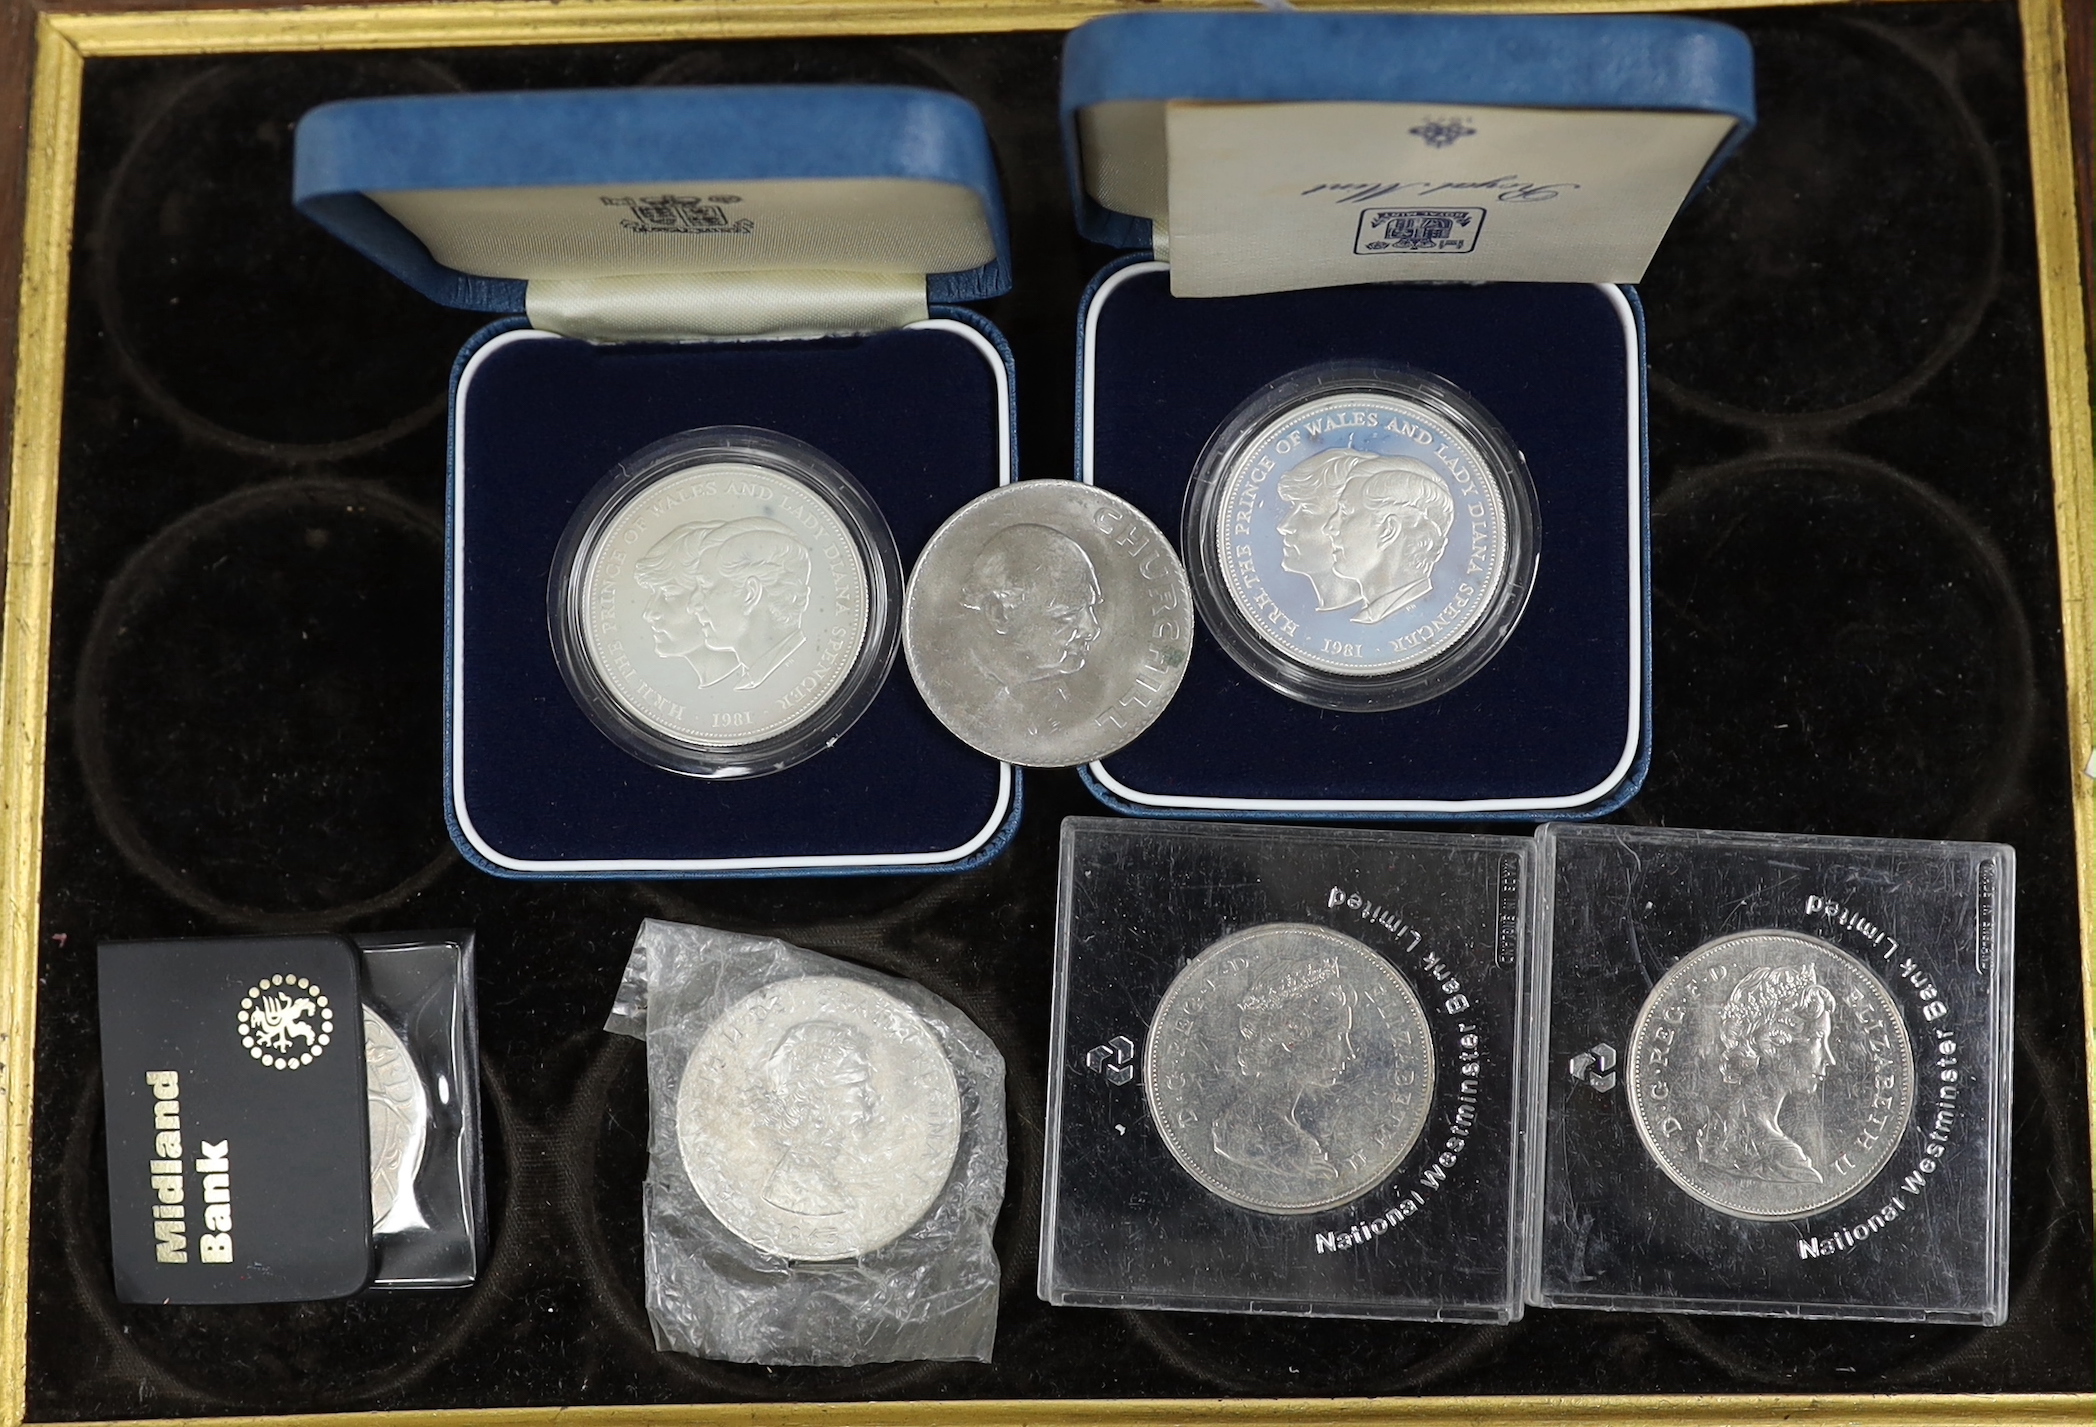 British coins, Royal Mint, QEII, two cased silver proof coins commemorating the marriage HRH Prince of Wales and Lady Diana Spencer 1981 and six other commemorative crowns